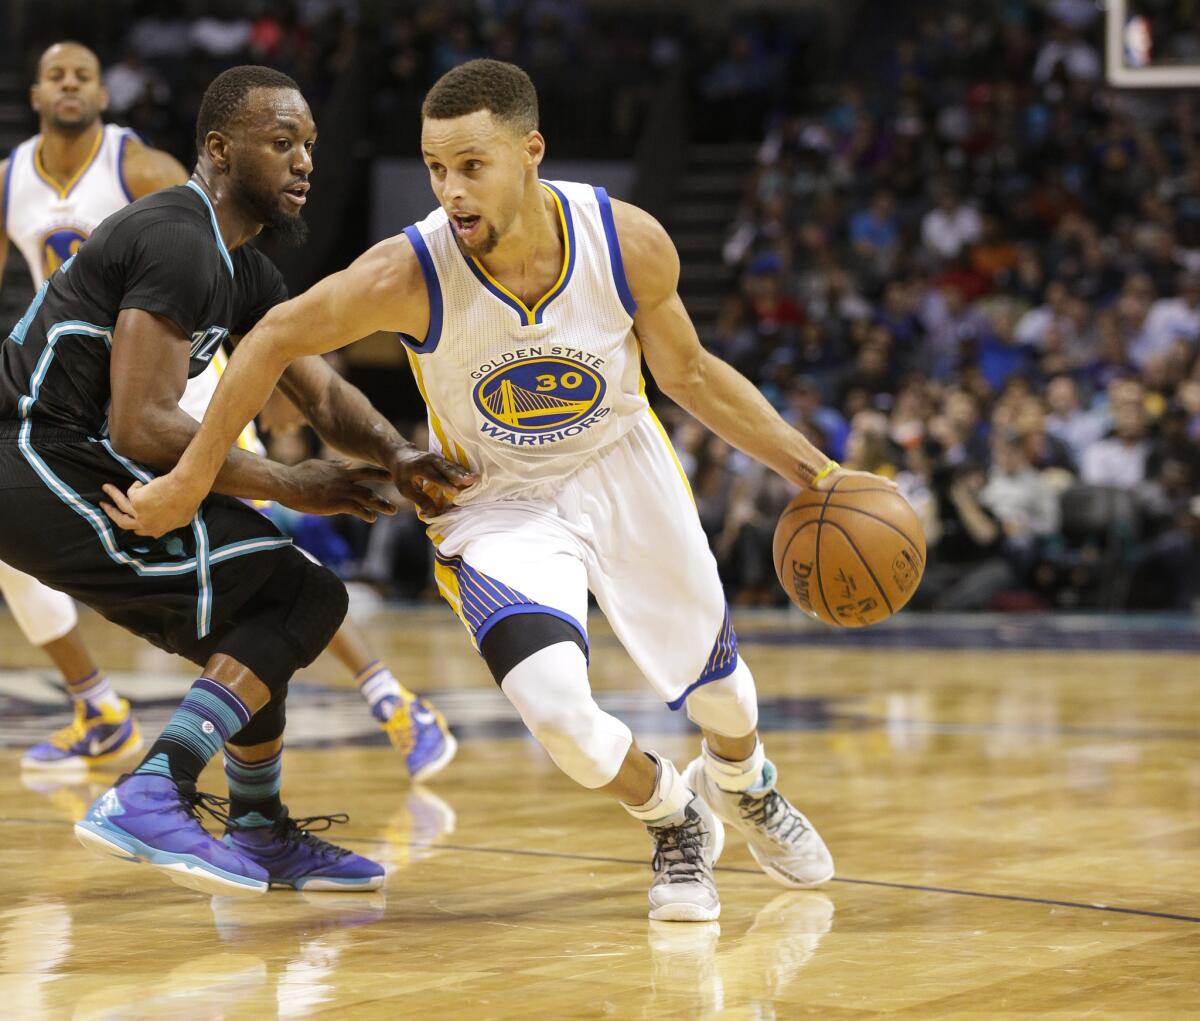 Warriors guard Stephen Curry drives past Hornets guard Kemba Walker in the second half.